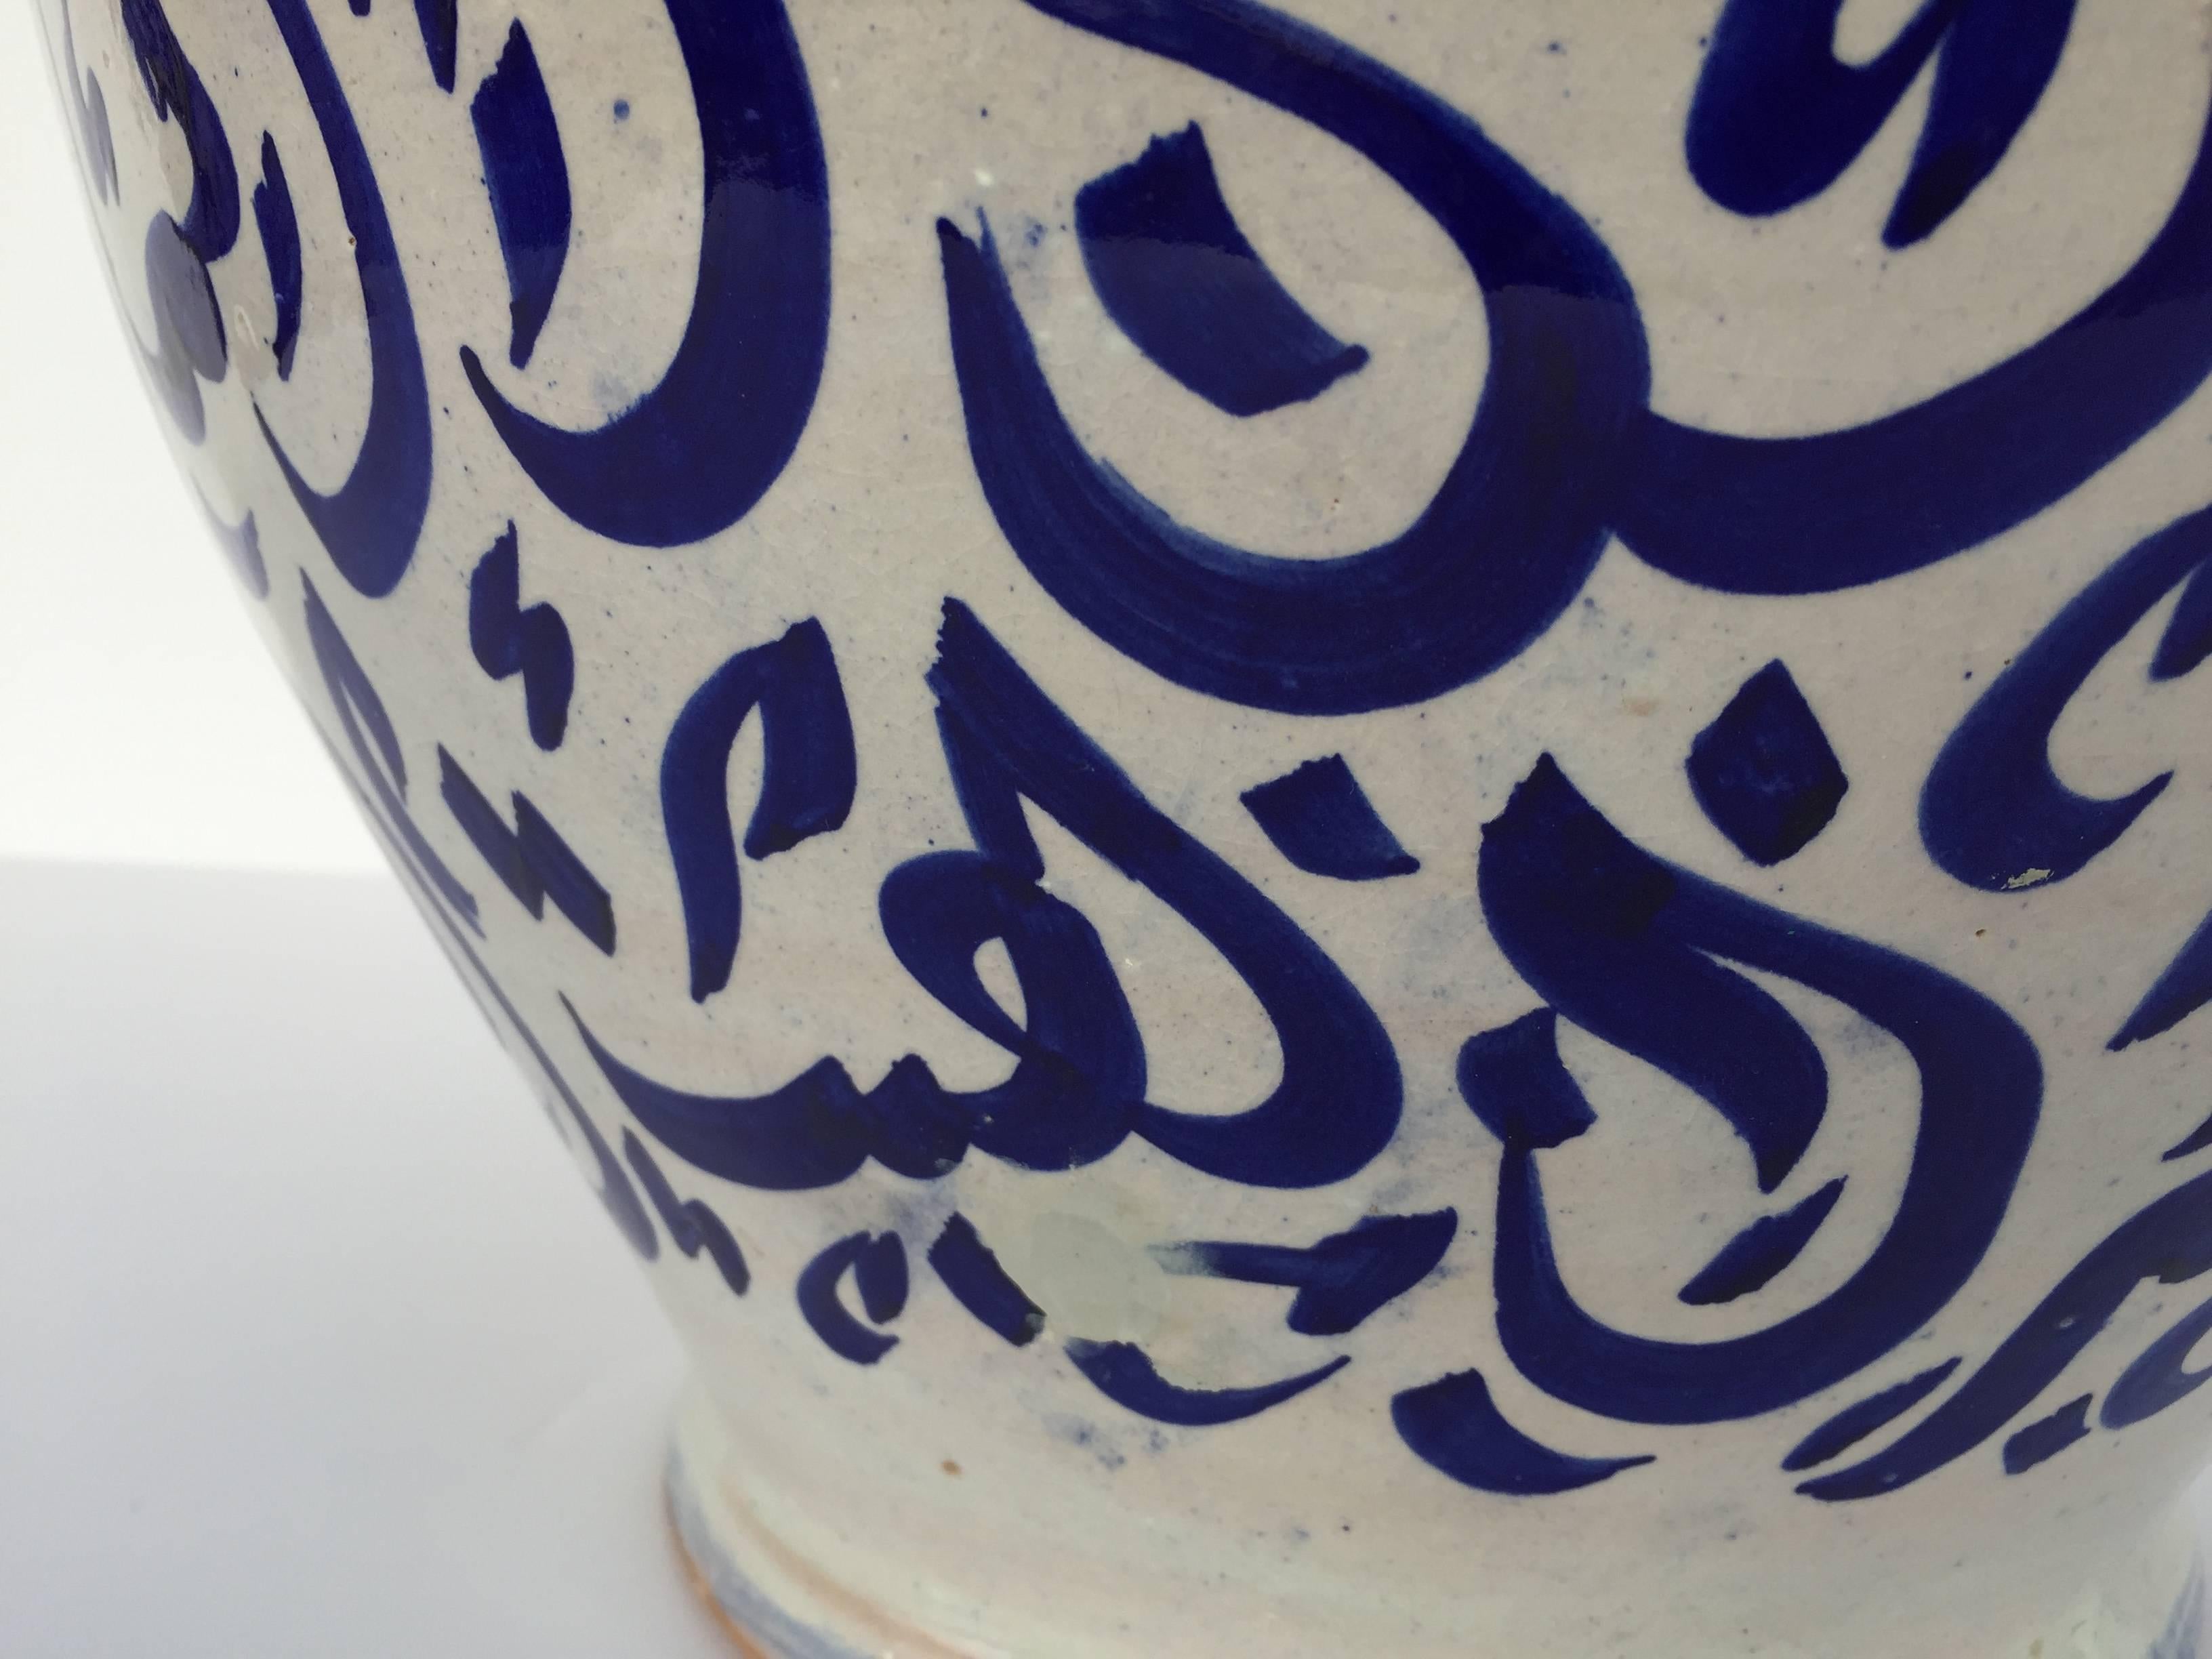 Large Moroccan Ceramic Vase from Fez with Blue Calligraphy Writing (Keramik)